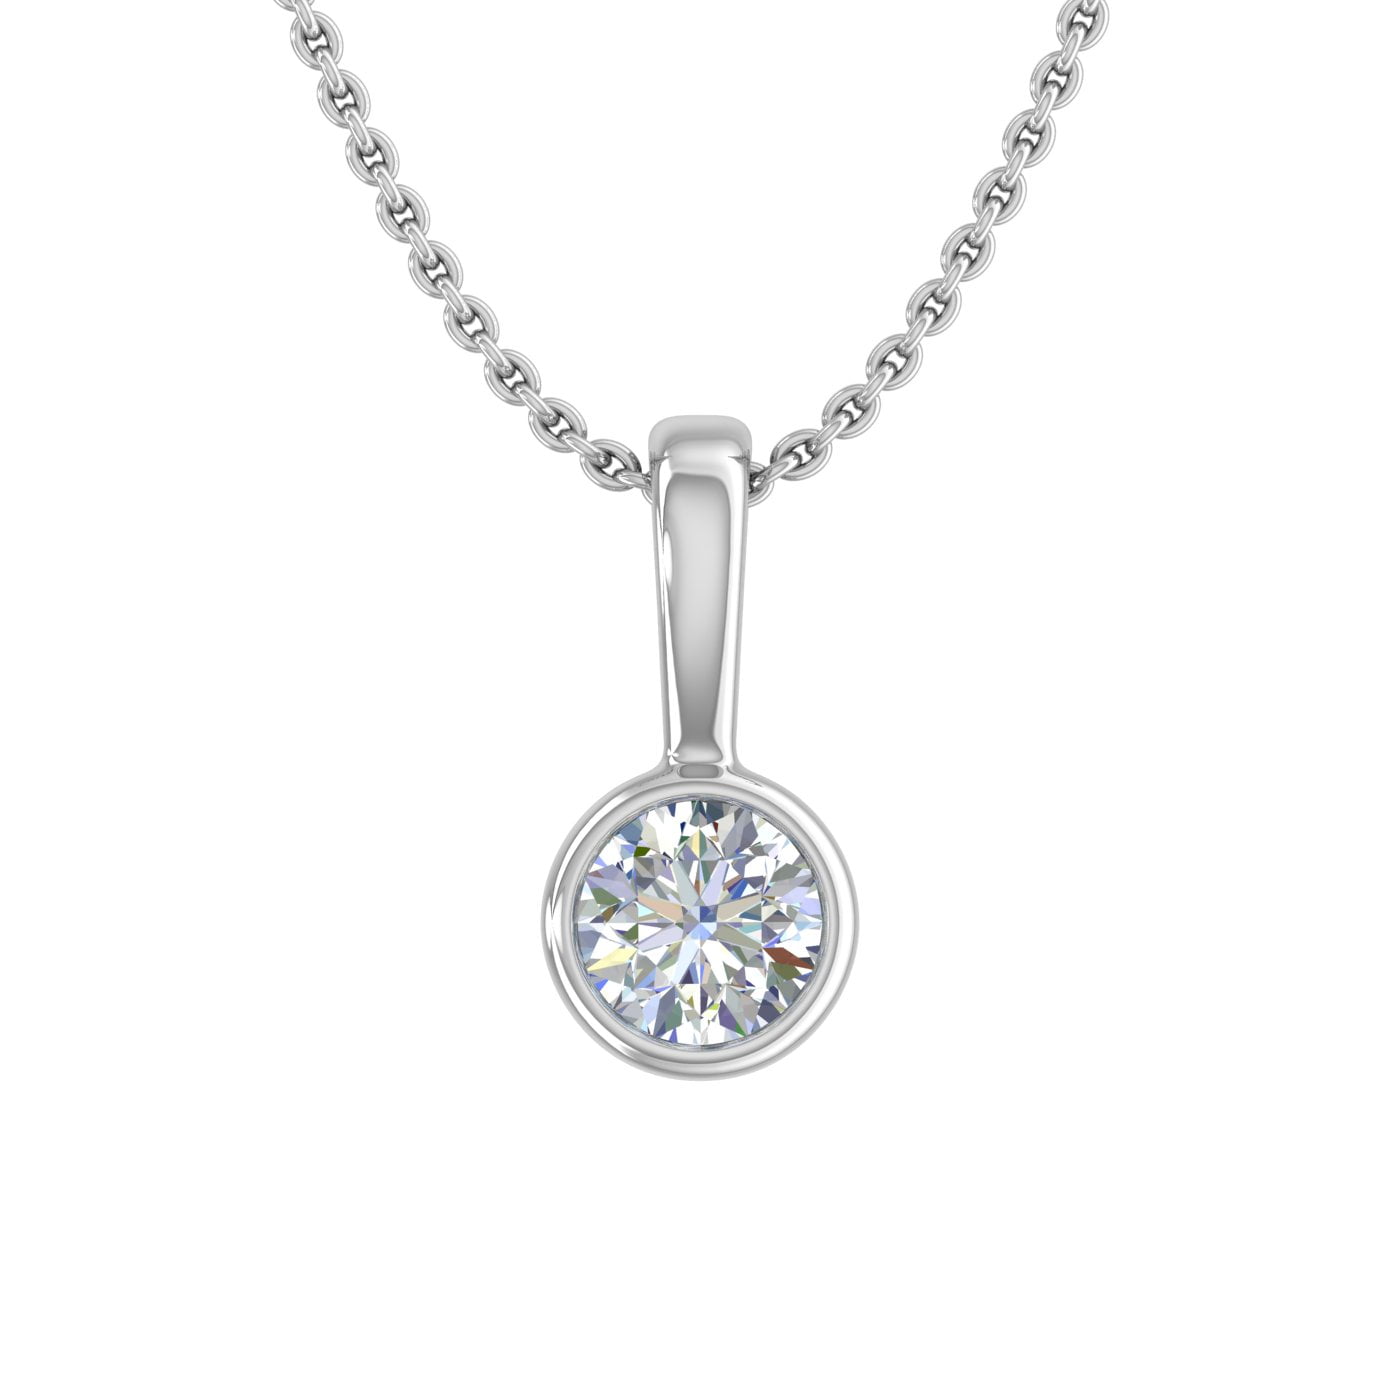 Buy Round Diamond Necklace, Half Carat Diamond Diamond Solitaire Necklace,  14k or 18k Solid Gold With 0.5 Carat GIA Diamond Necklace Online in India -  Etsy